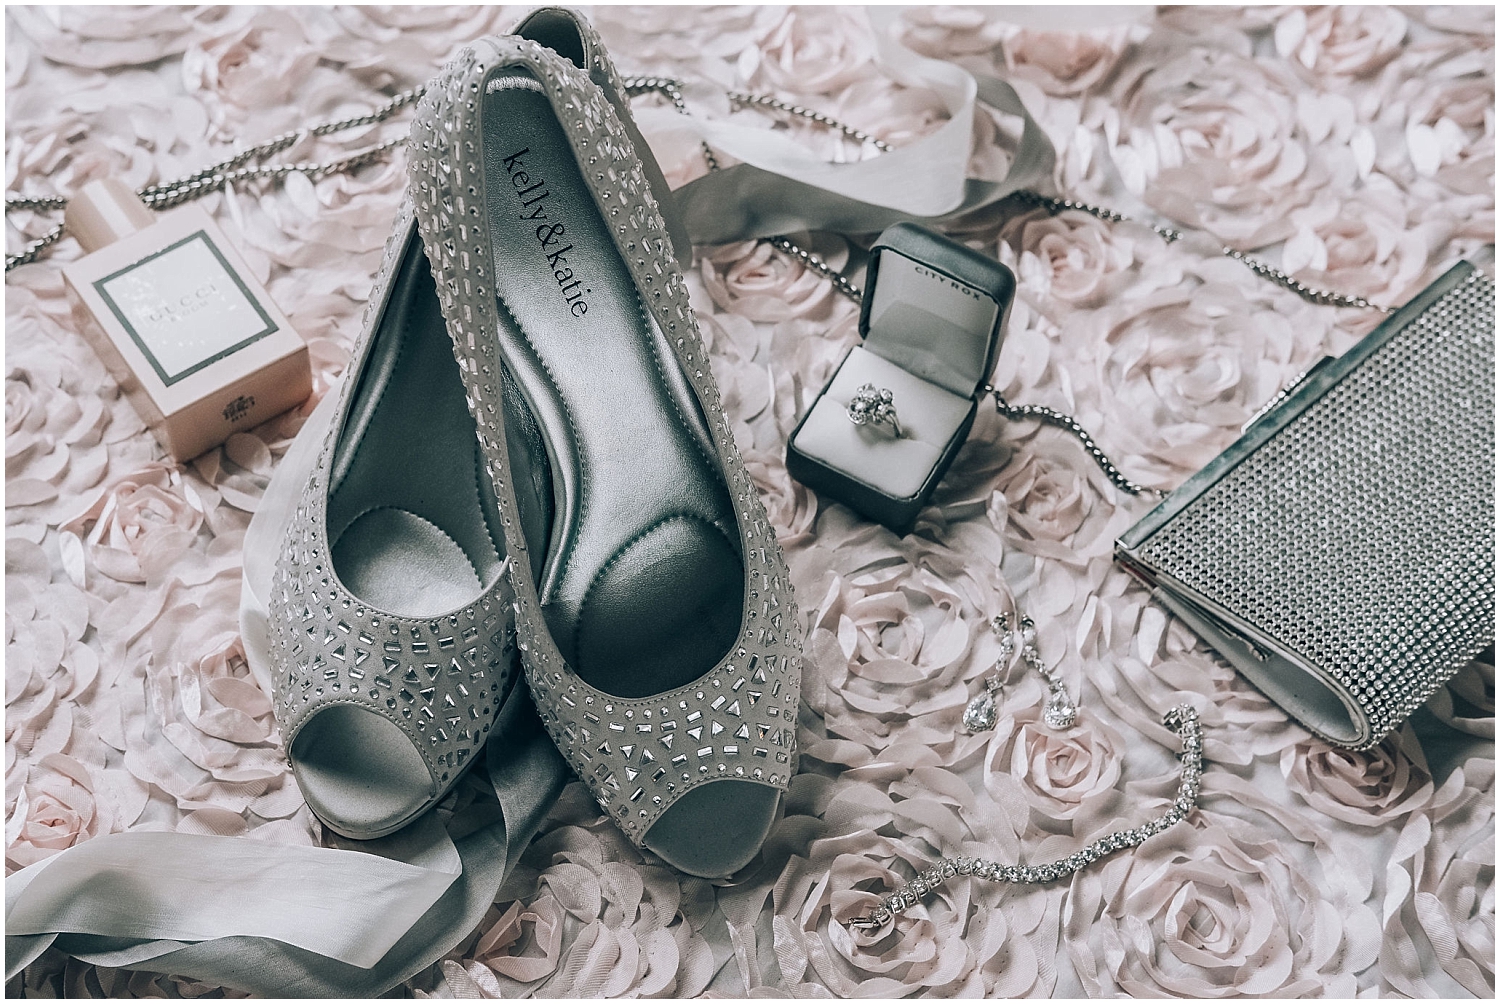  wedding shoes and wedding accessories 